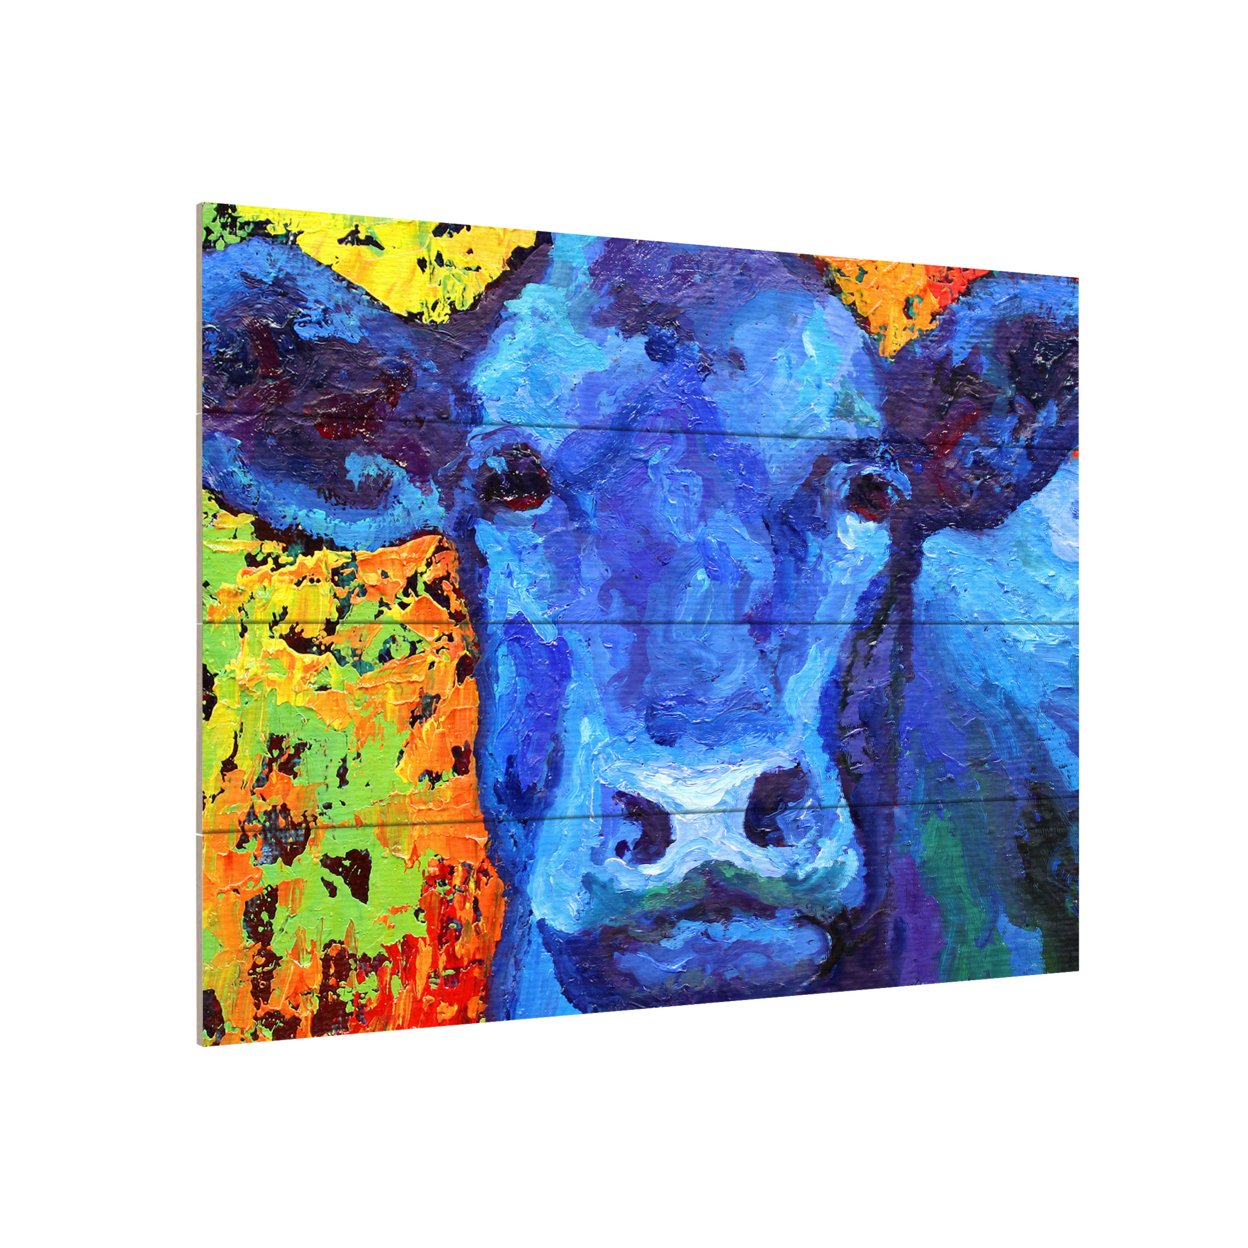 Wall Art 12 X 16 Inches Titled Blue Cow Ready To Hang Printed On Wooden Planks